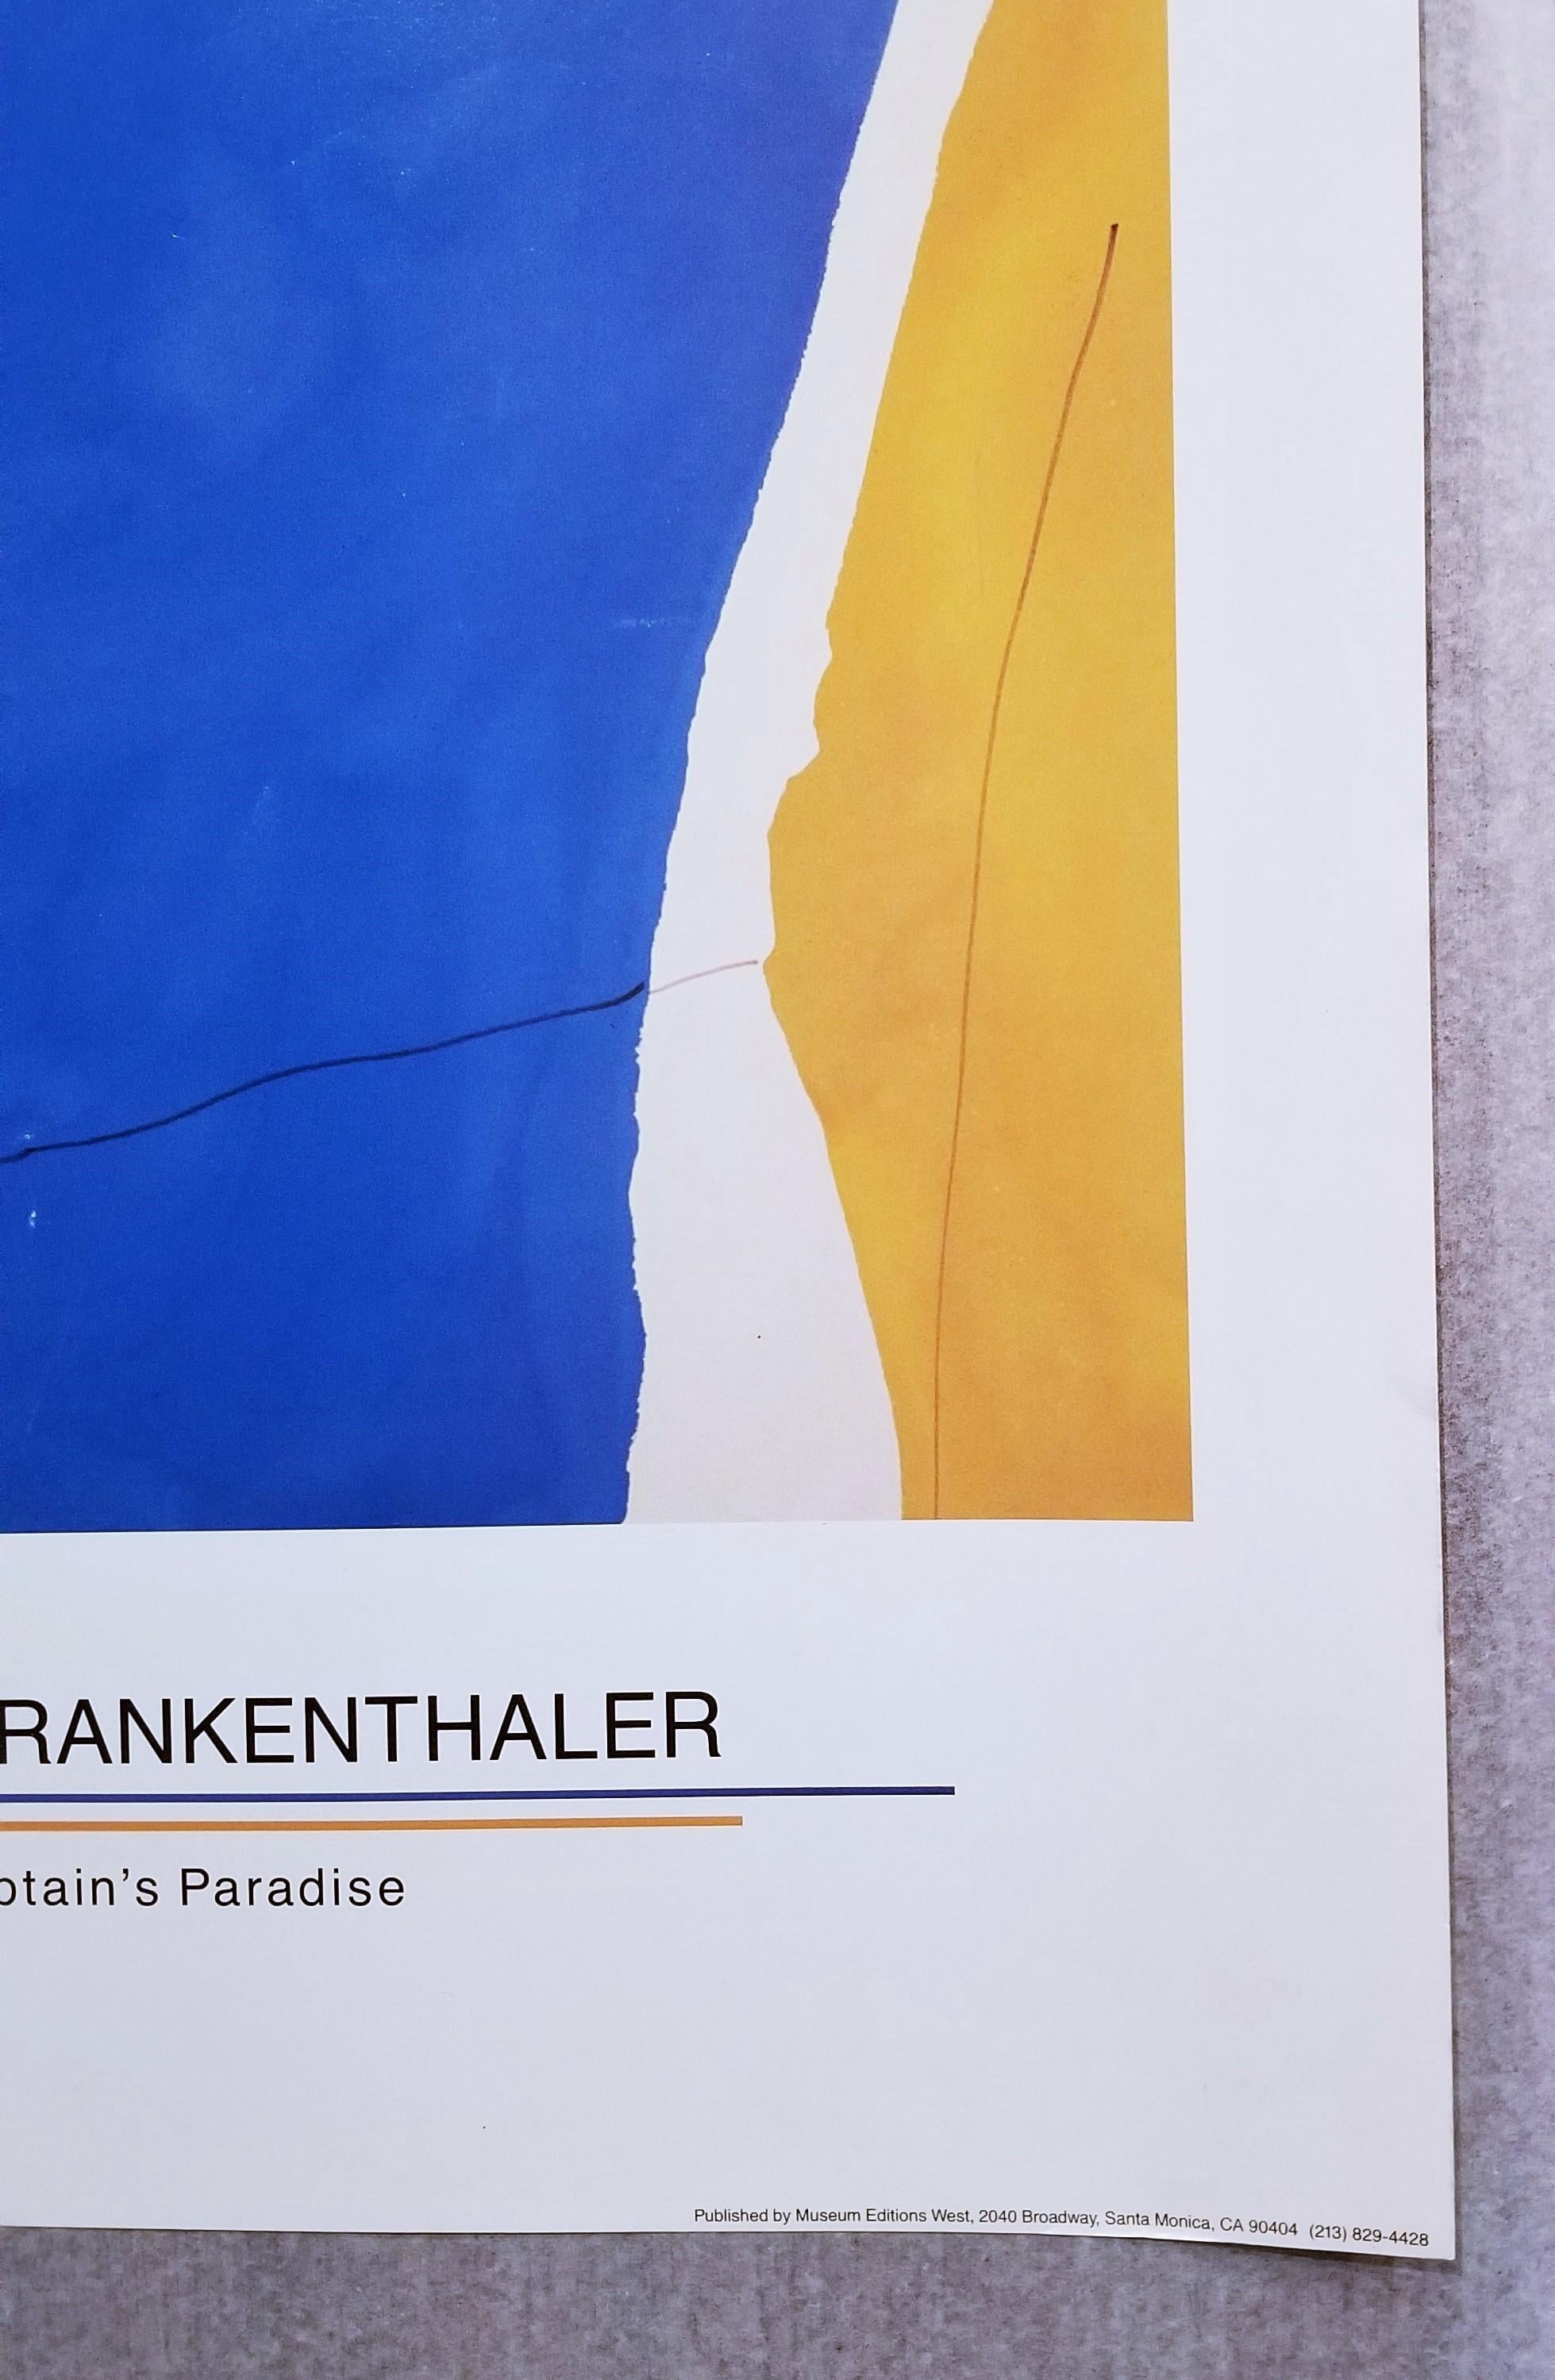 Columbus Museum of Art (Captain's Paradise) Poster - Abstract Expressionist Print by Helen Frankenthaler